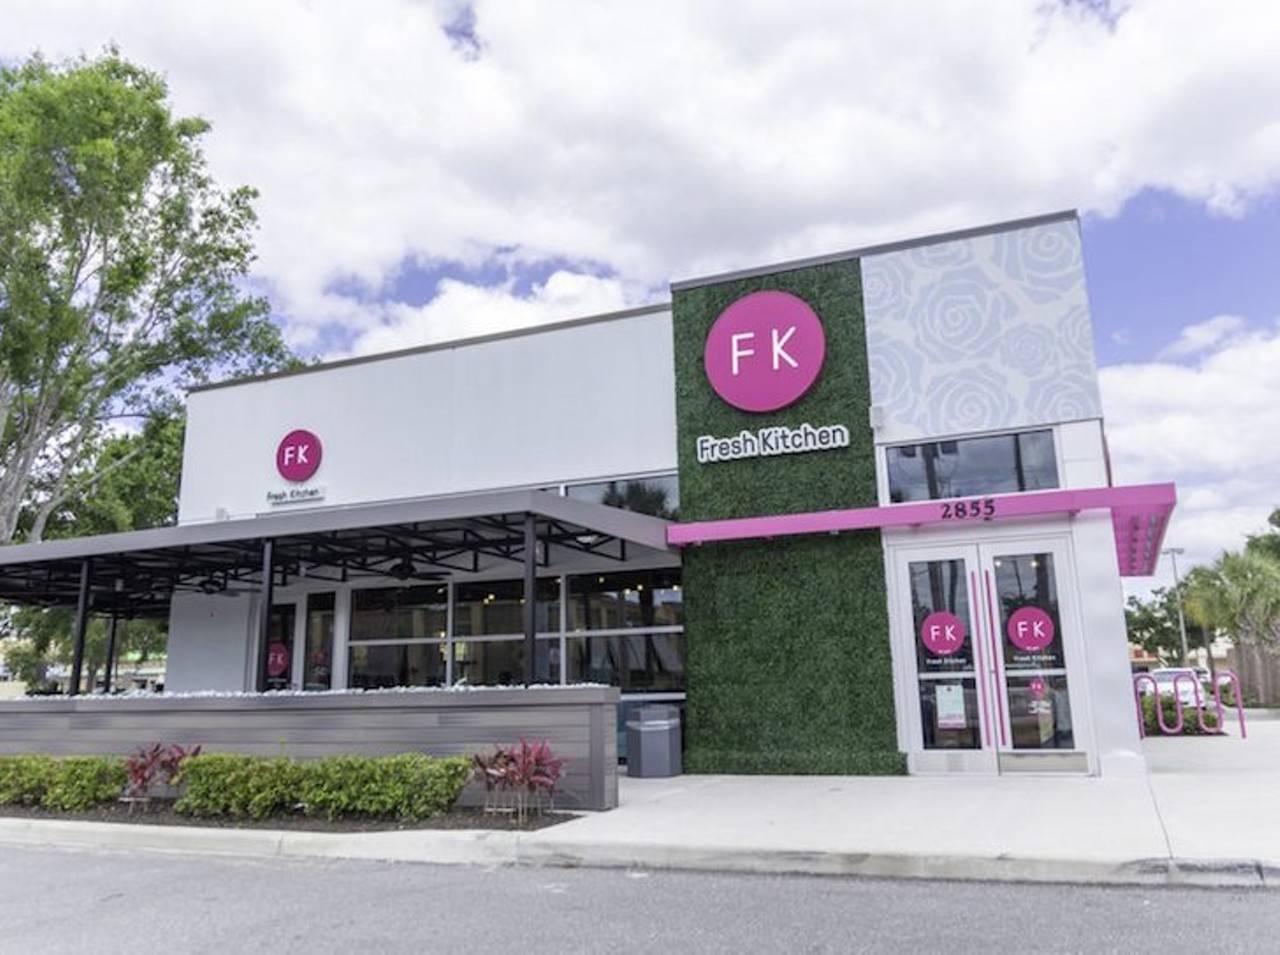 Fresh Kitchen
2855 S. Orange Avenue, Orlando, 32806 (407) 601-1127 
At their second Orlando location in SoDo, Fresh Kitchen continues to serve up hormone- and antibiotic-free meats and veggies. A customer favorite&#151;coconut ginger rice.
Photo via Fresh Kitchen/Yelp